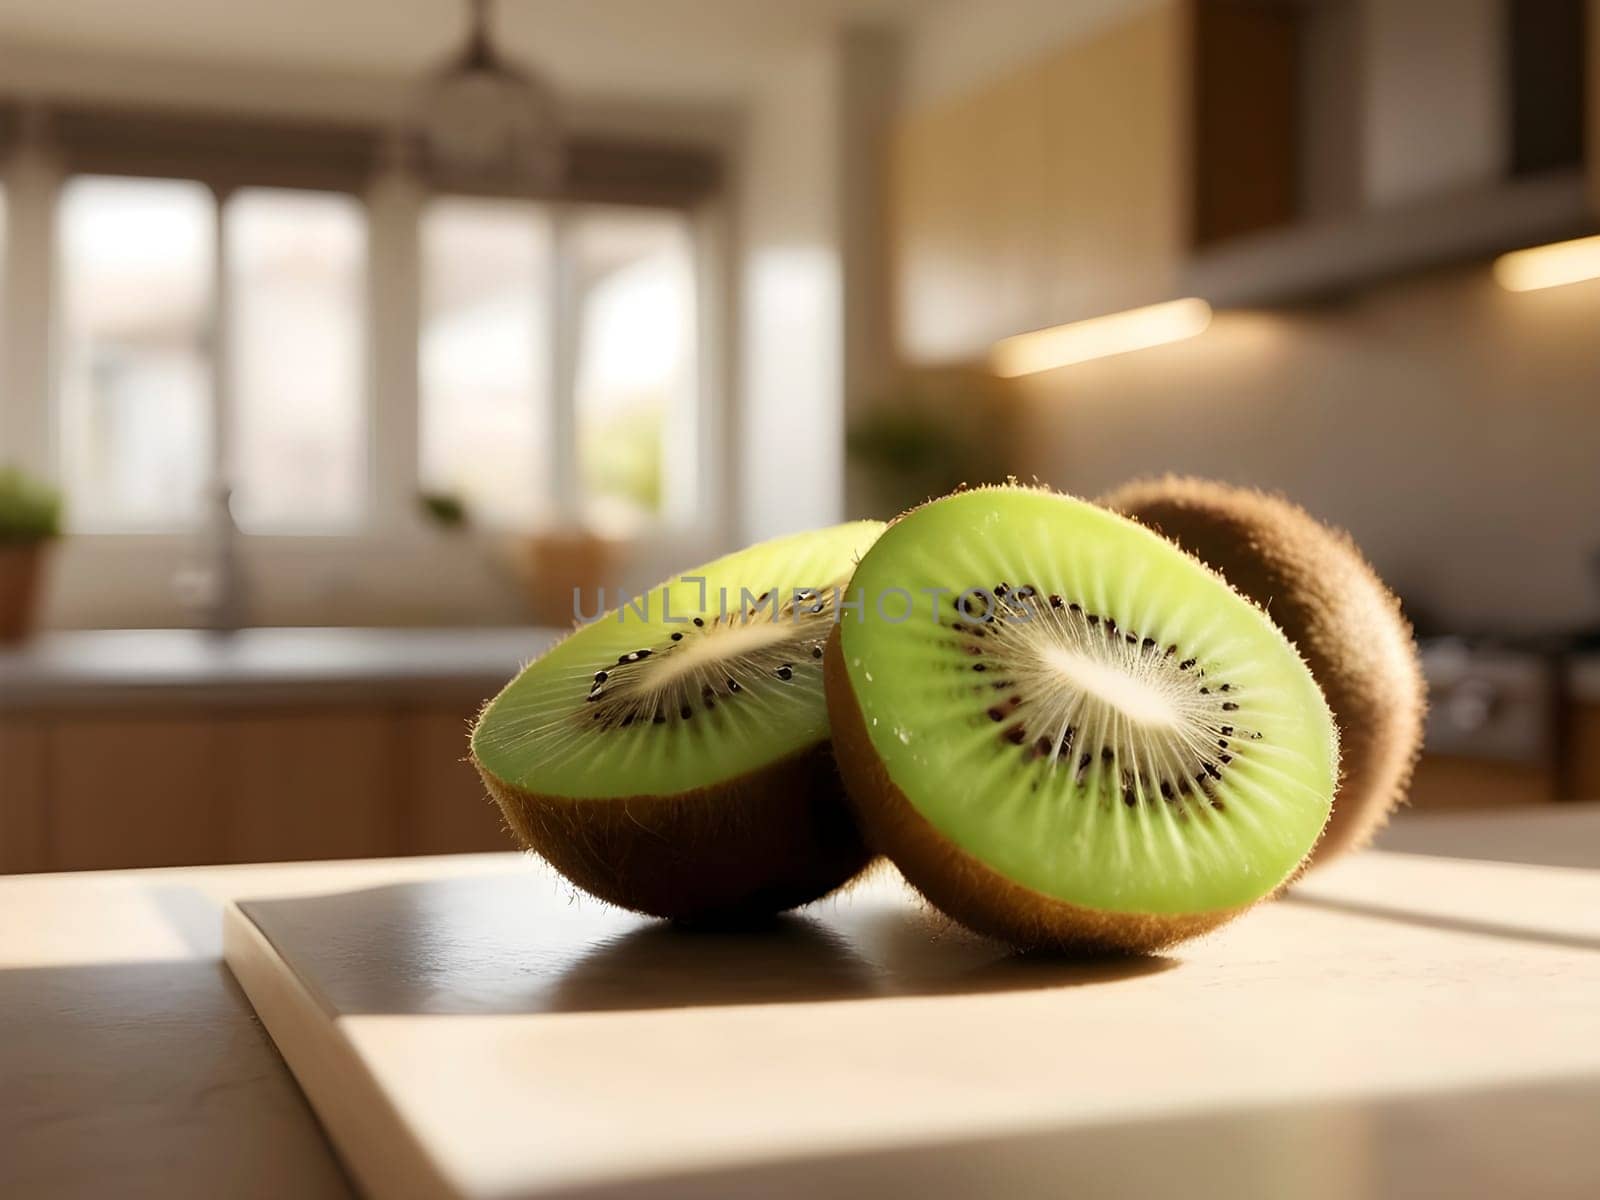 Sunny Afternoons: Kiwi Spotlight in a Cozy Kitchen Bathed in Warm Light.